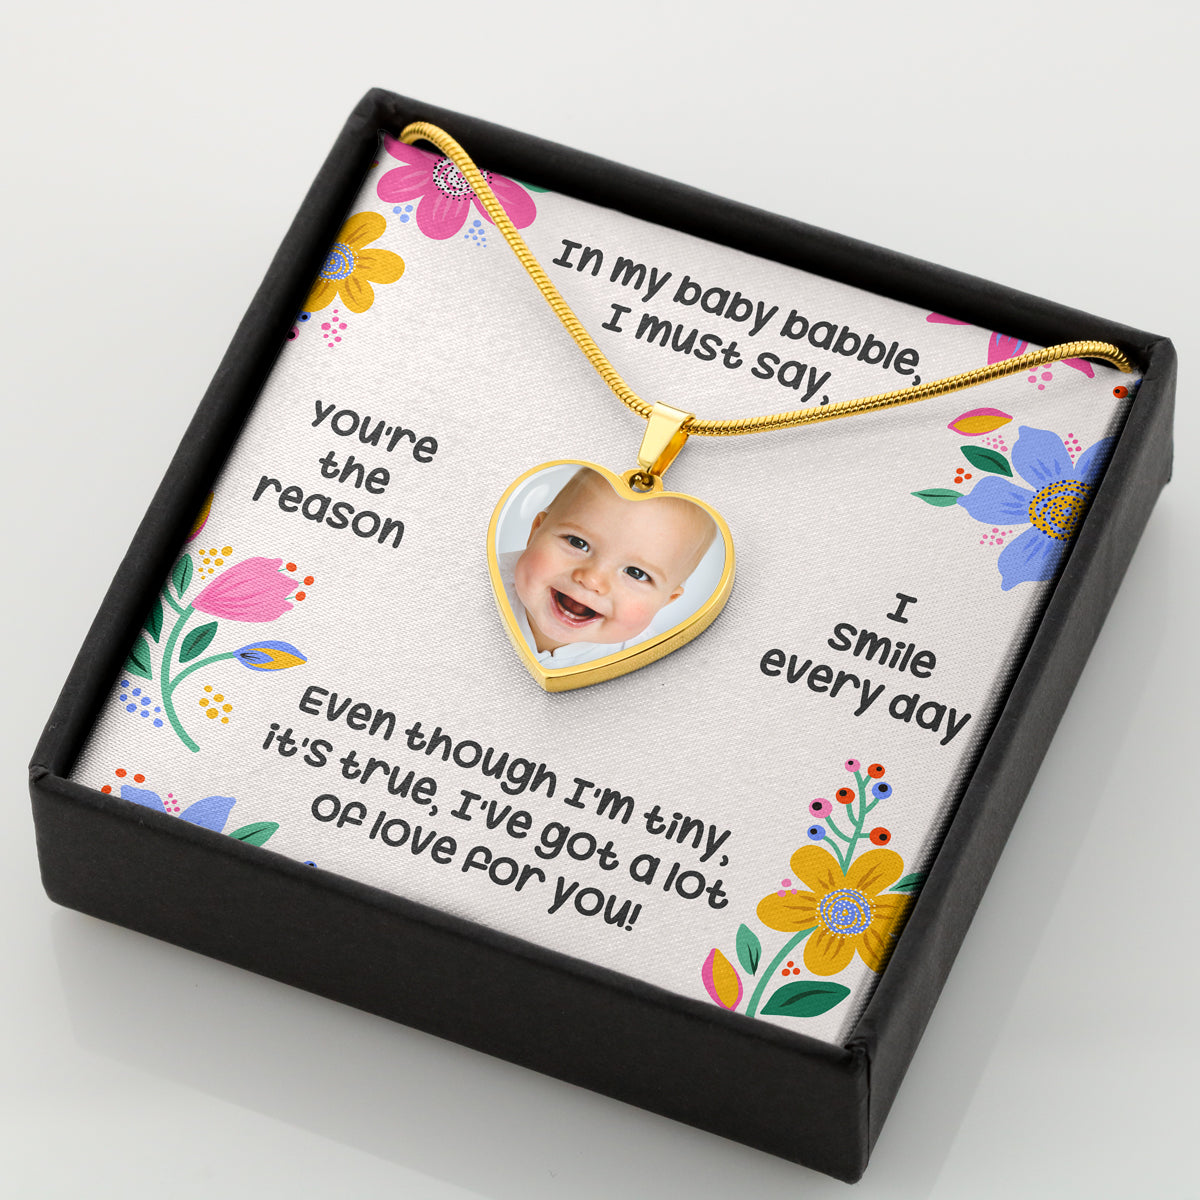 In my baby babble, I've got a lot of love for you! Photo Necklace (with box)